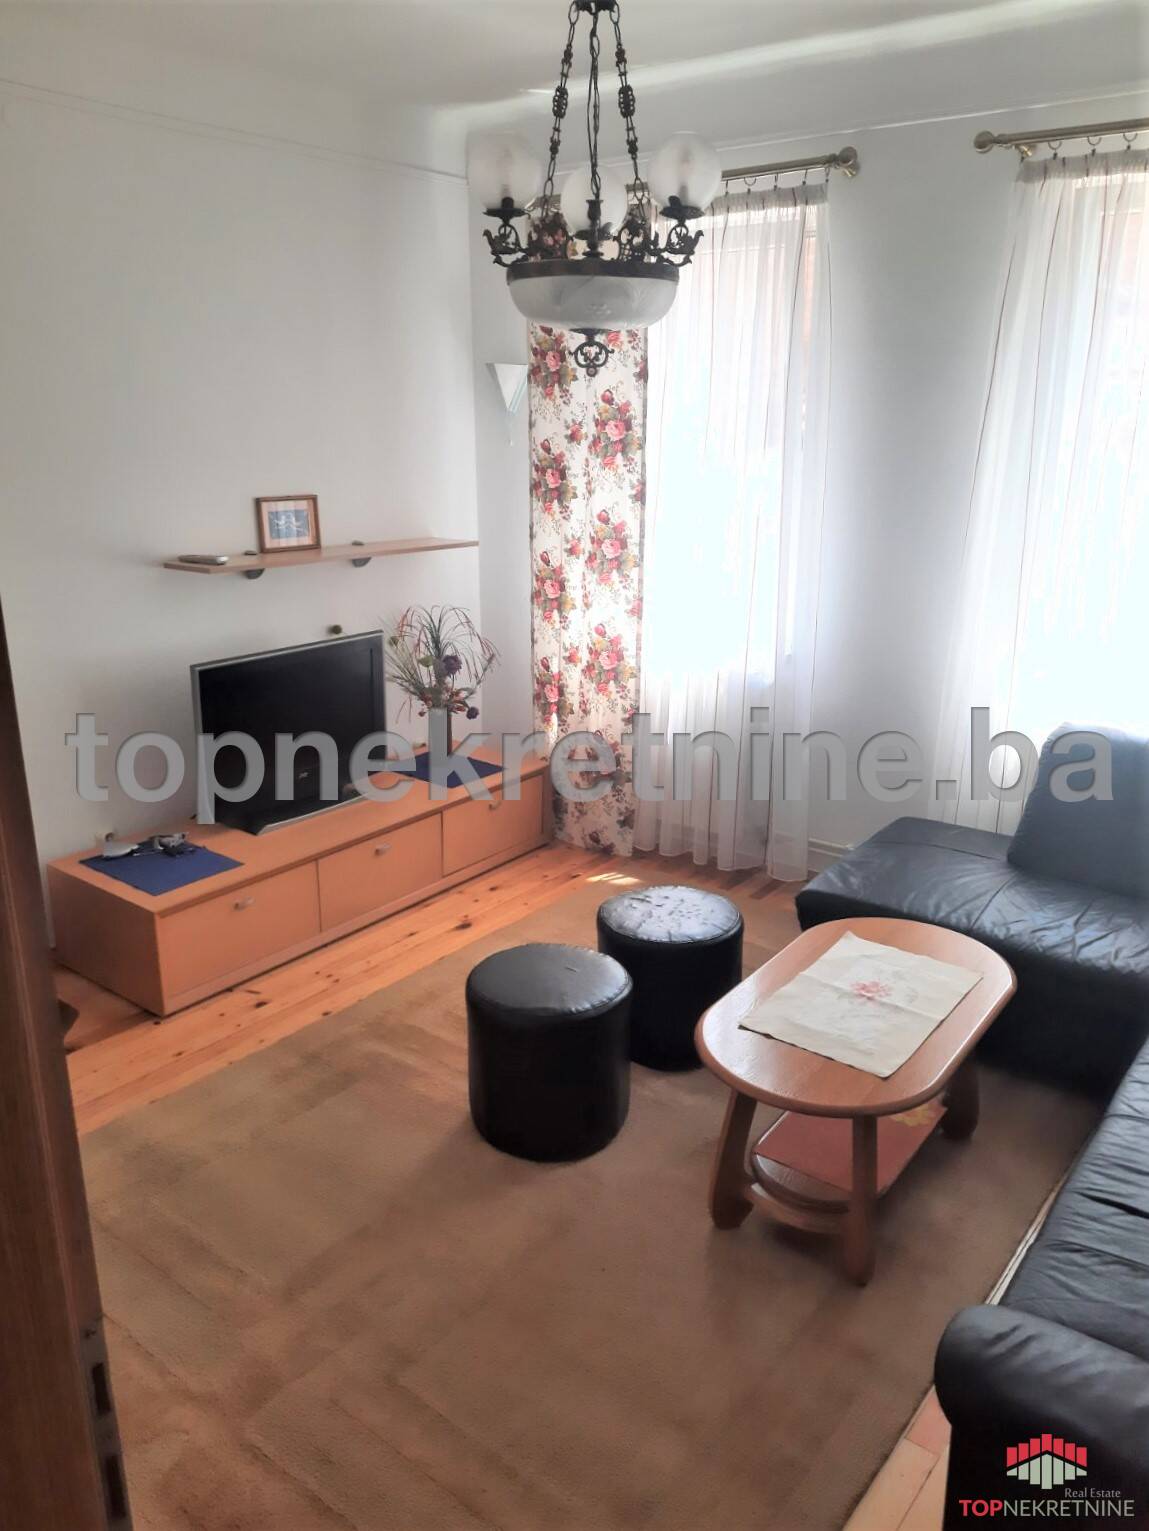 Furnished 1BDR apartment with 43 SqM in the heart of the Old town